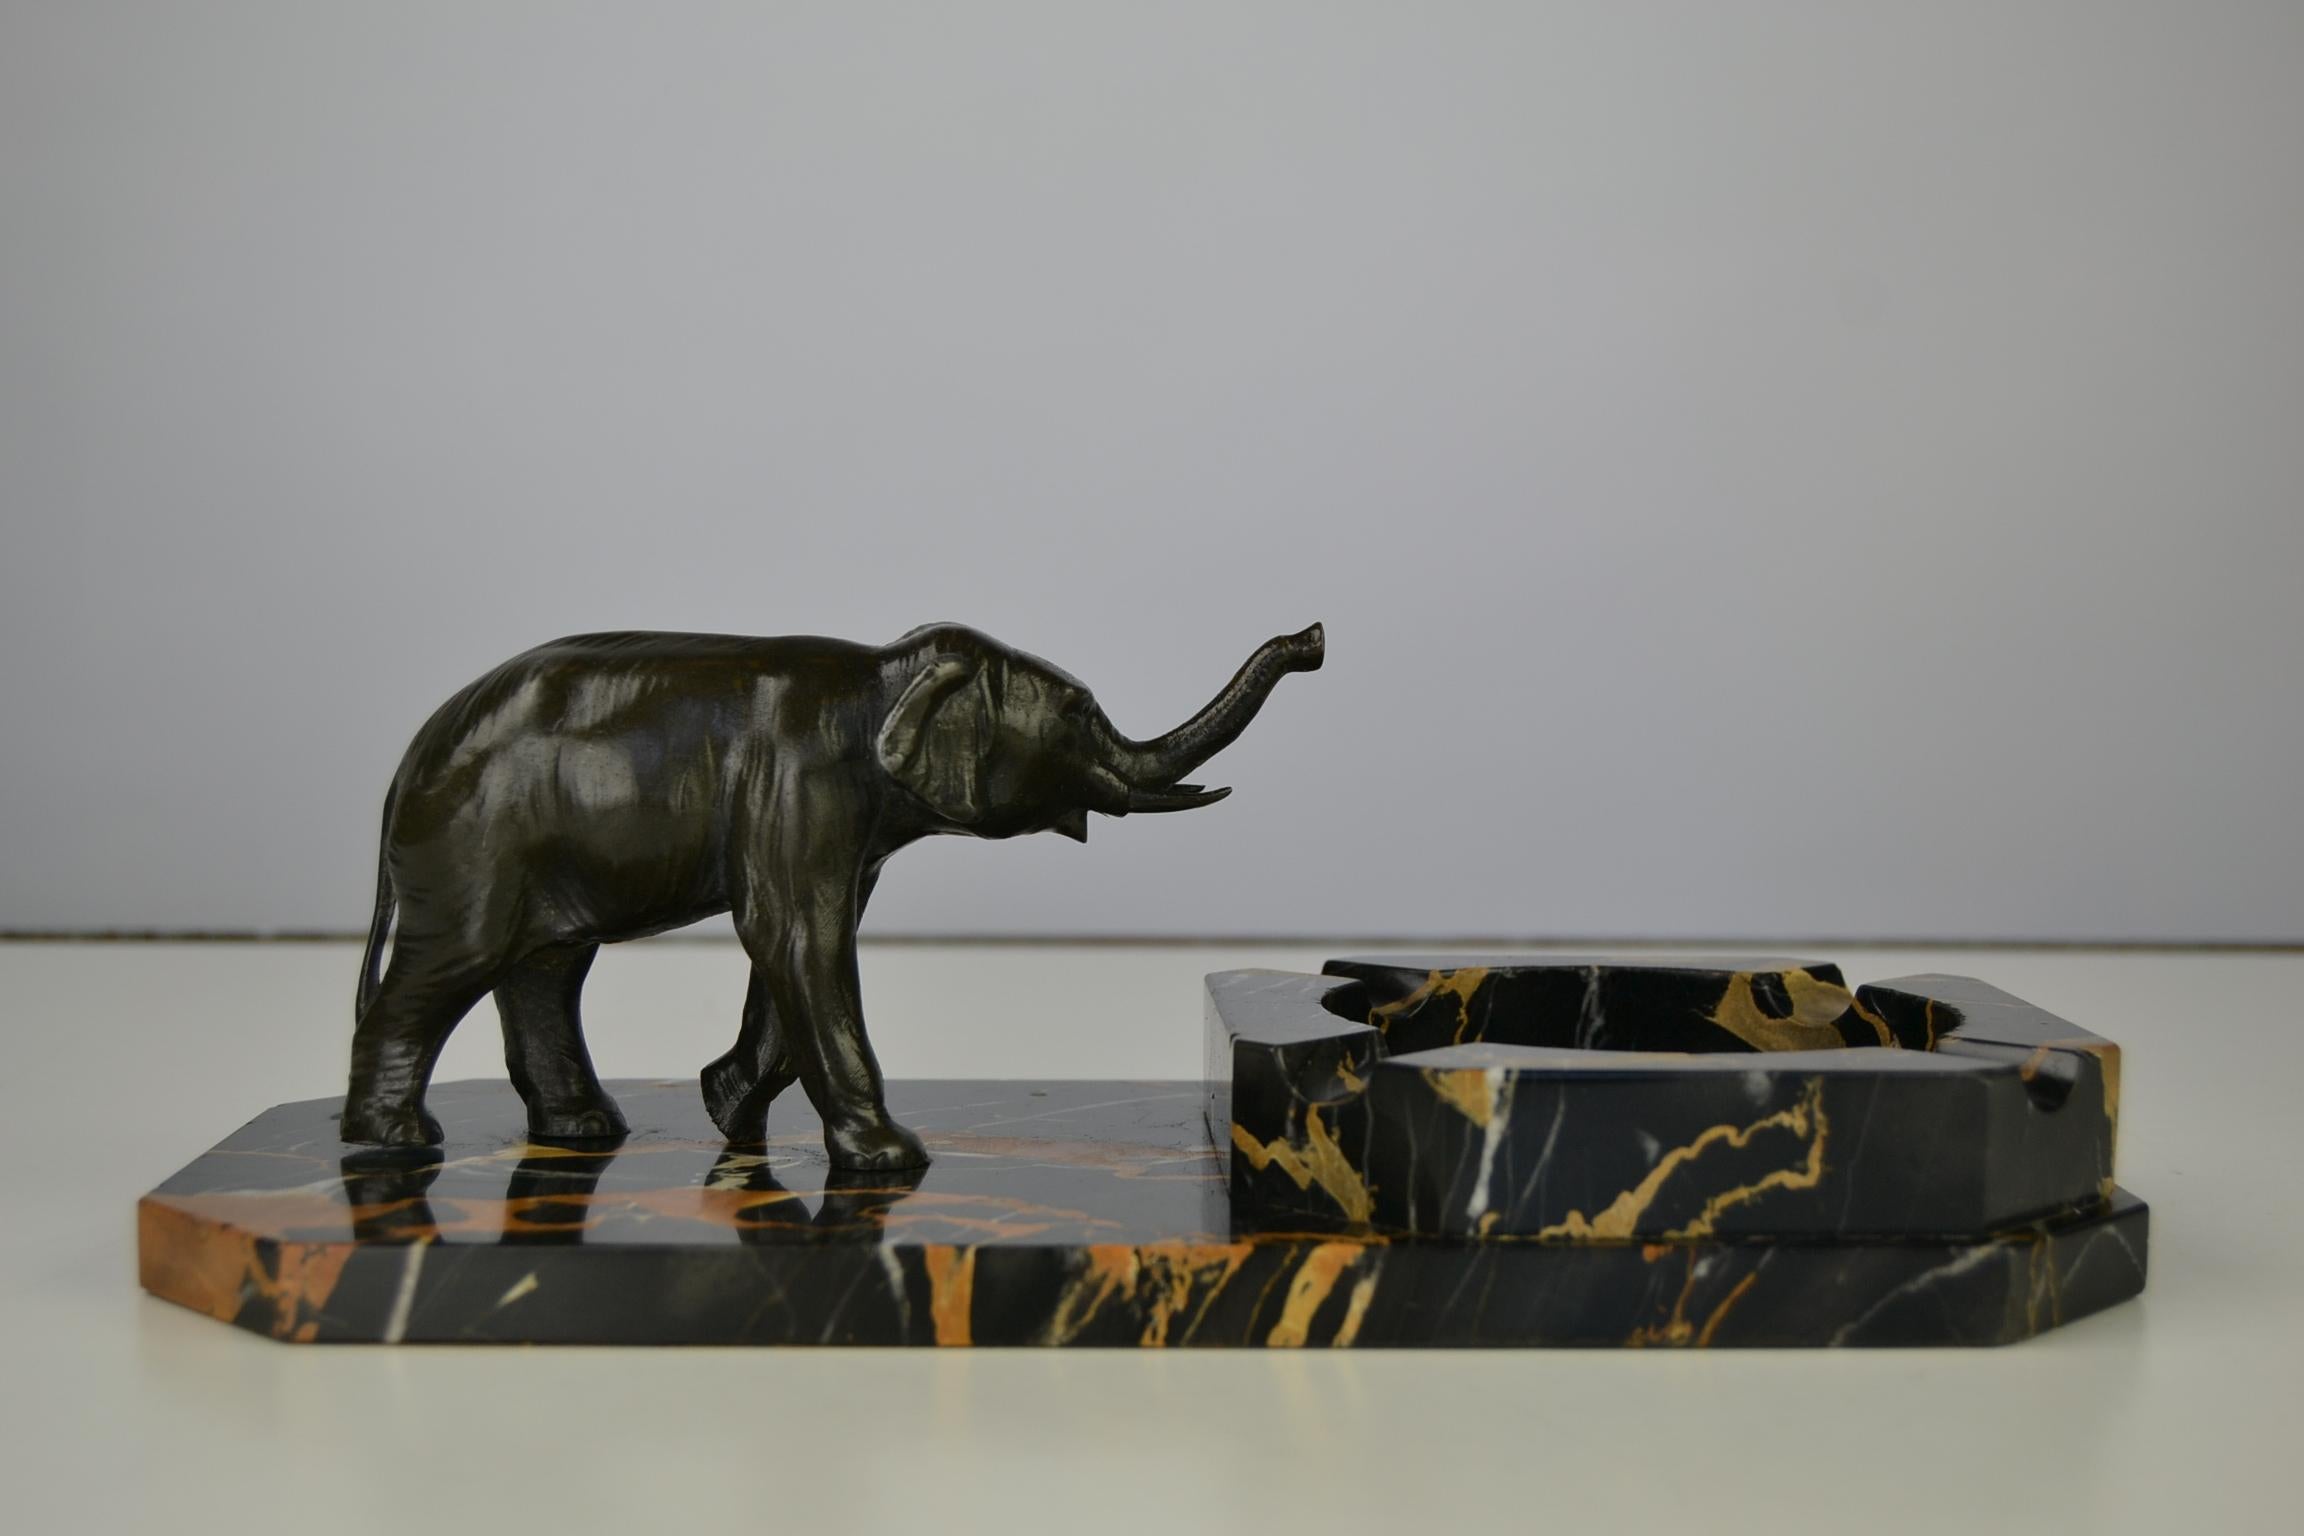 Art Deco marble ashtray on a marble base with an elephant figurine.
An Art Deco figural ashtray or Art Deco desk accessory. 
The Italian marble - Portoro marble - has the stylish colors black with gold and brown veins. The elephant figurine is